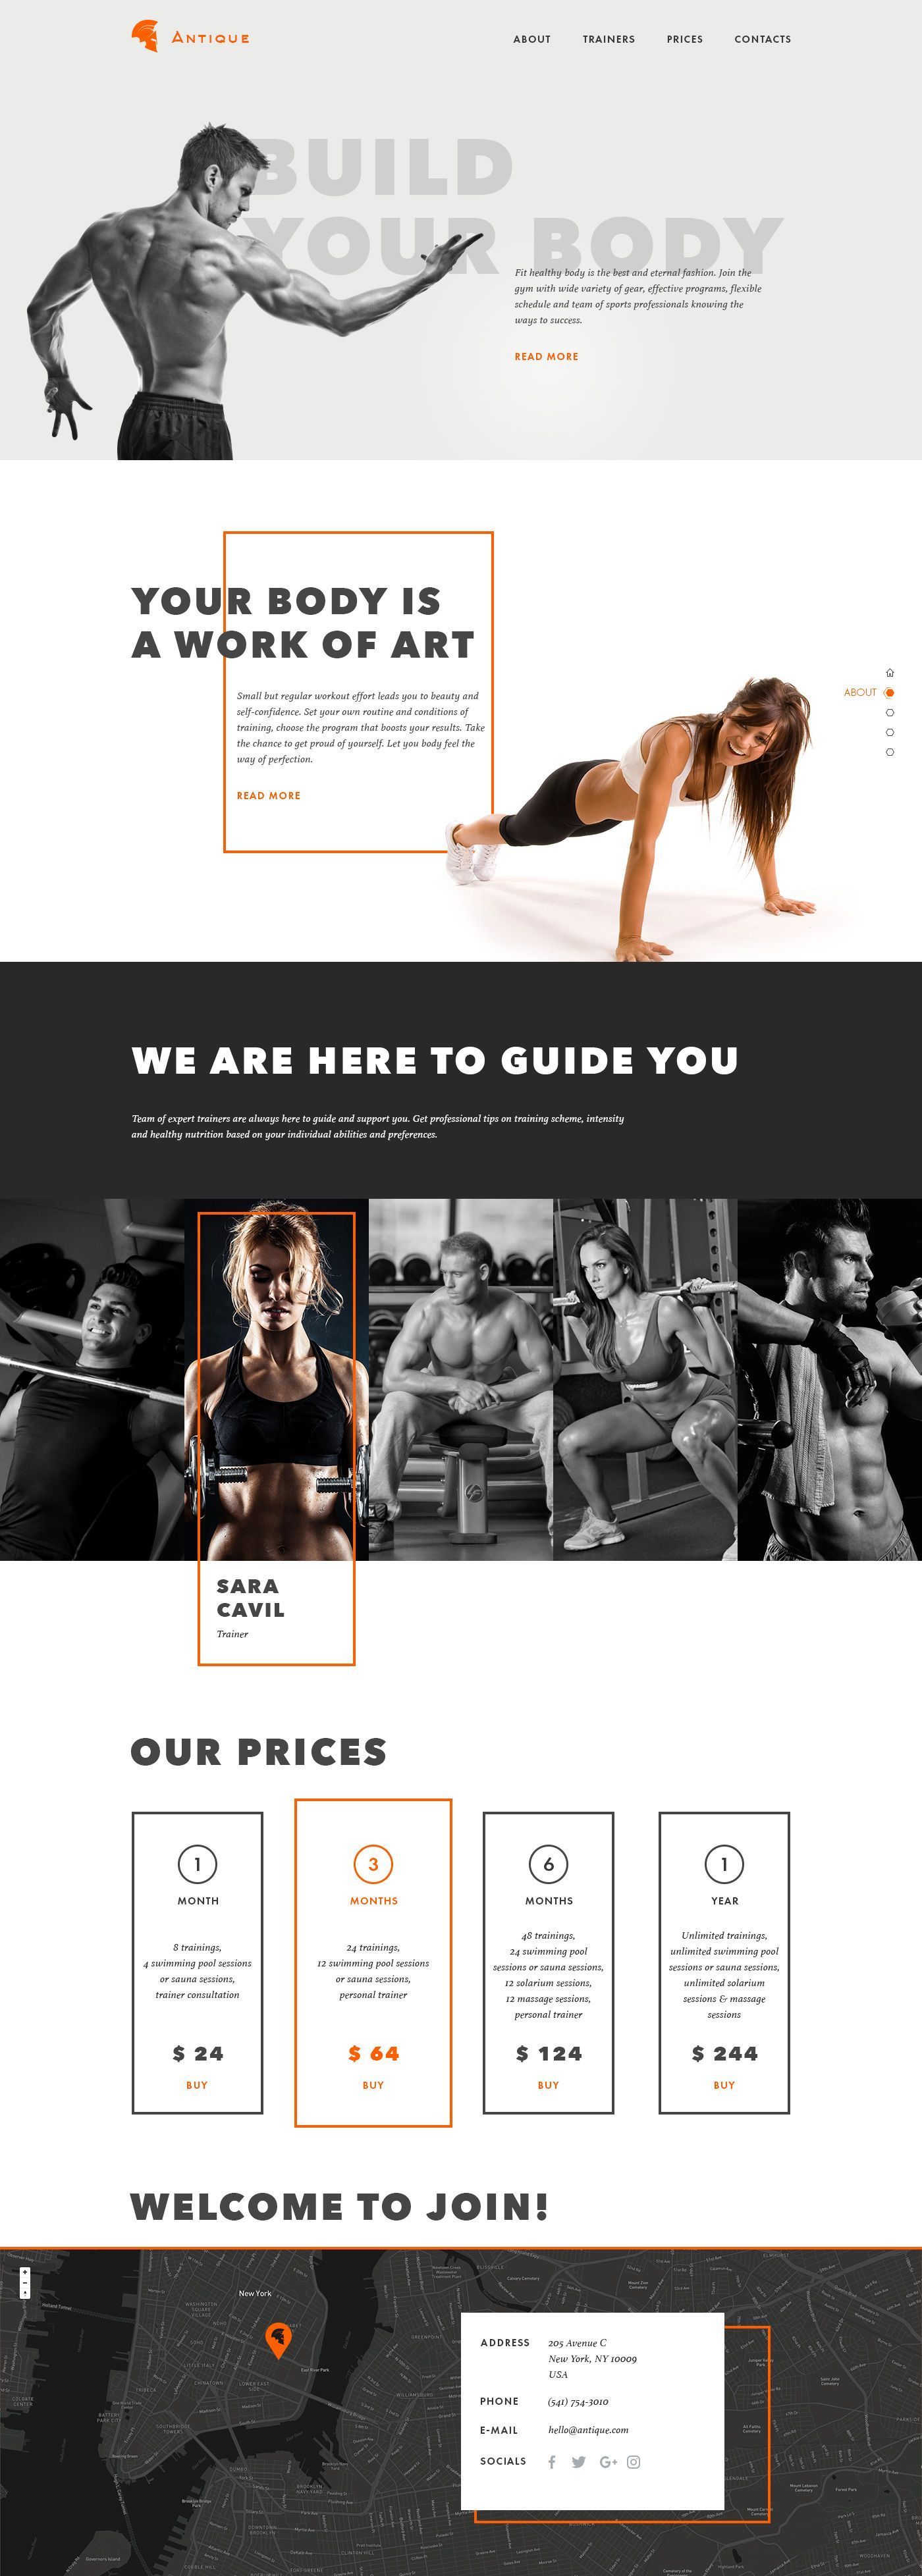 gym_landing_page_concept_by_tubik.jpg by Dima Panchenko -   fitness Design website